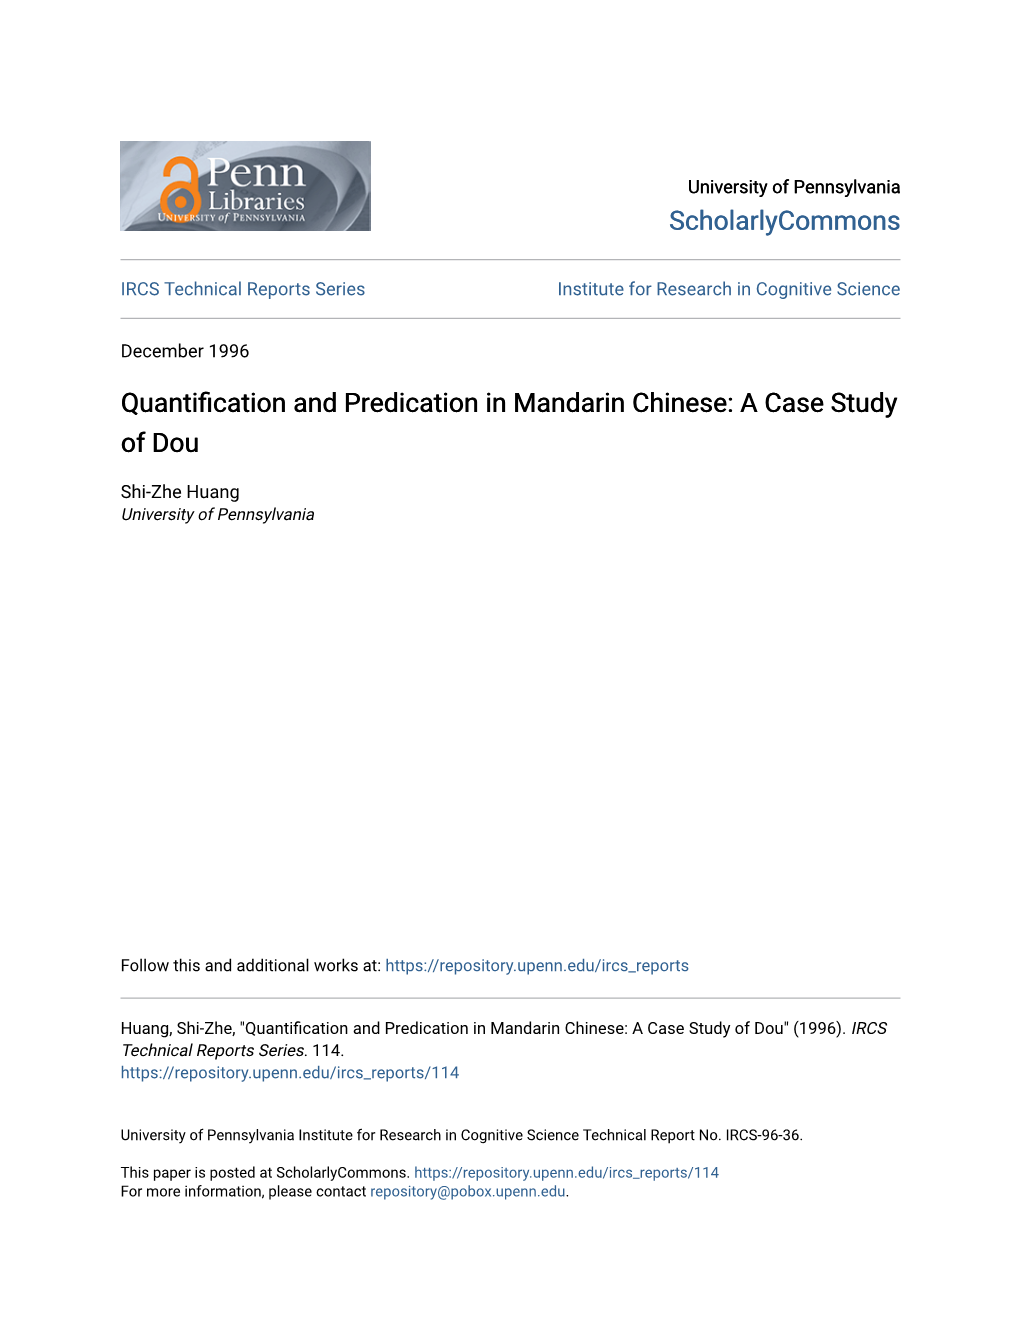 Quantification and Predication in Mandarin Chinese: a Case Study of Dou